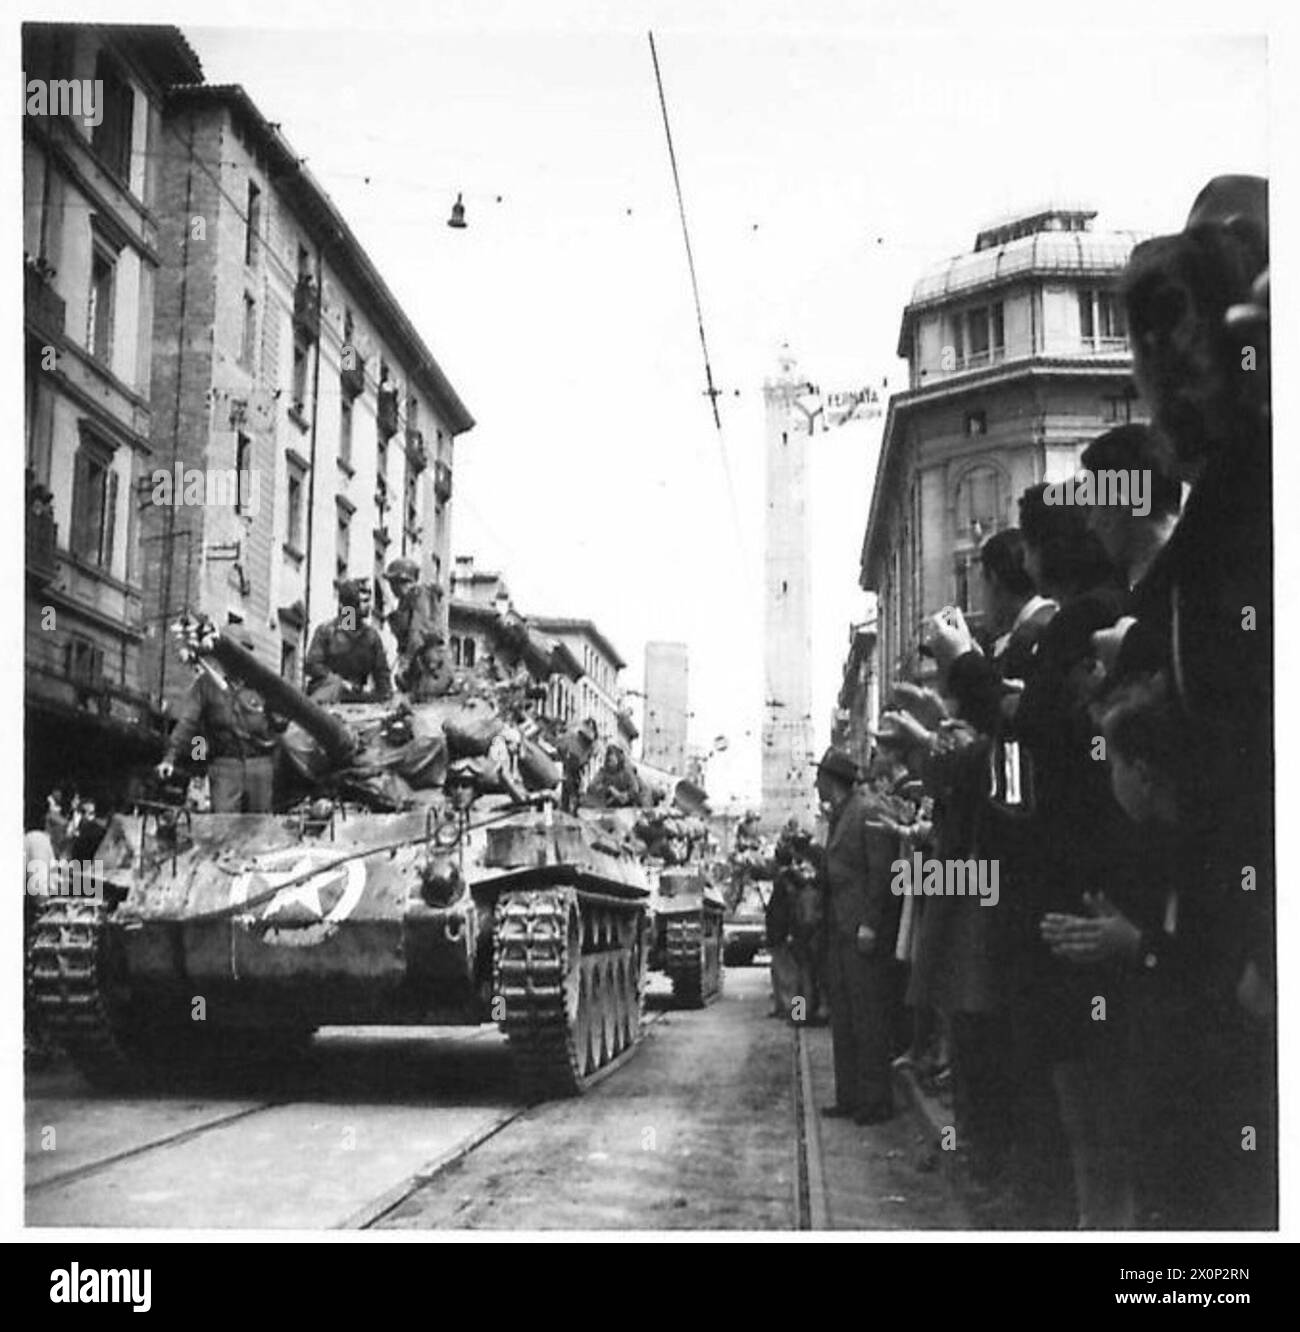 BOLOGNA : VARIOUS - Huge crowds of Bolognese citizens clap and cheer as armour passes through the streets. Photographic negative , British Army Stock Photo